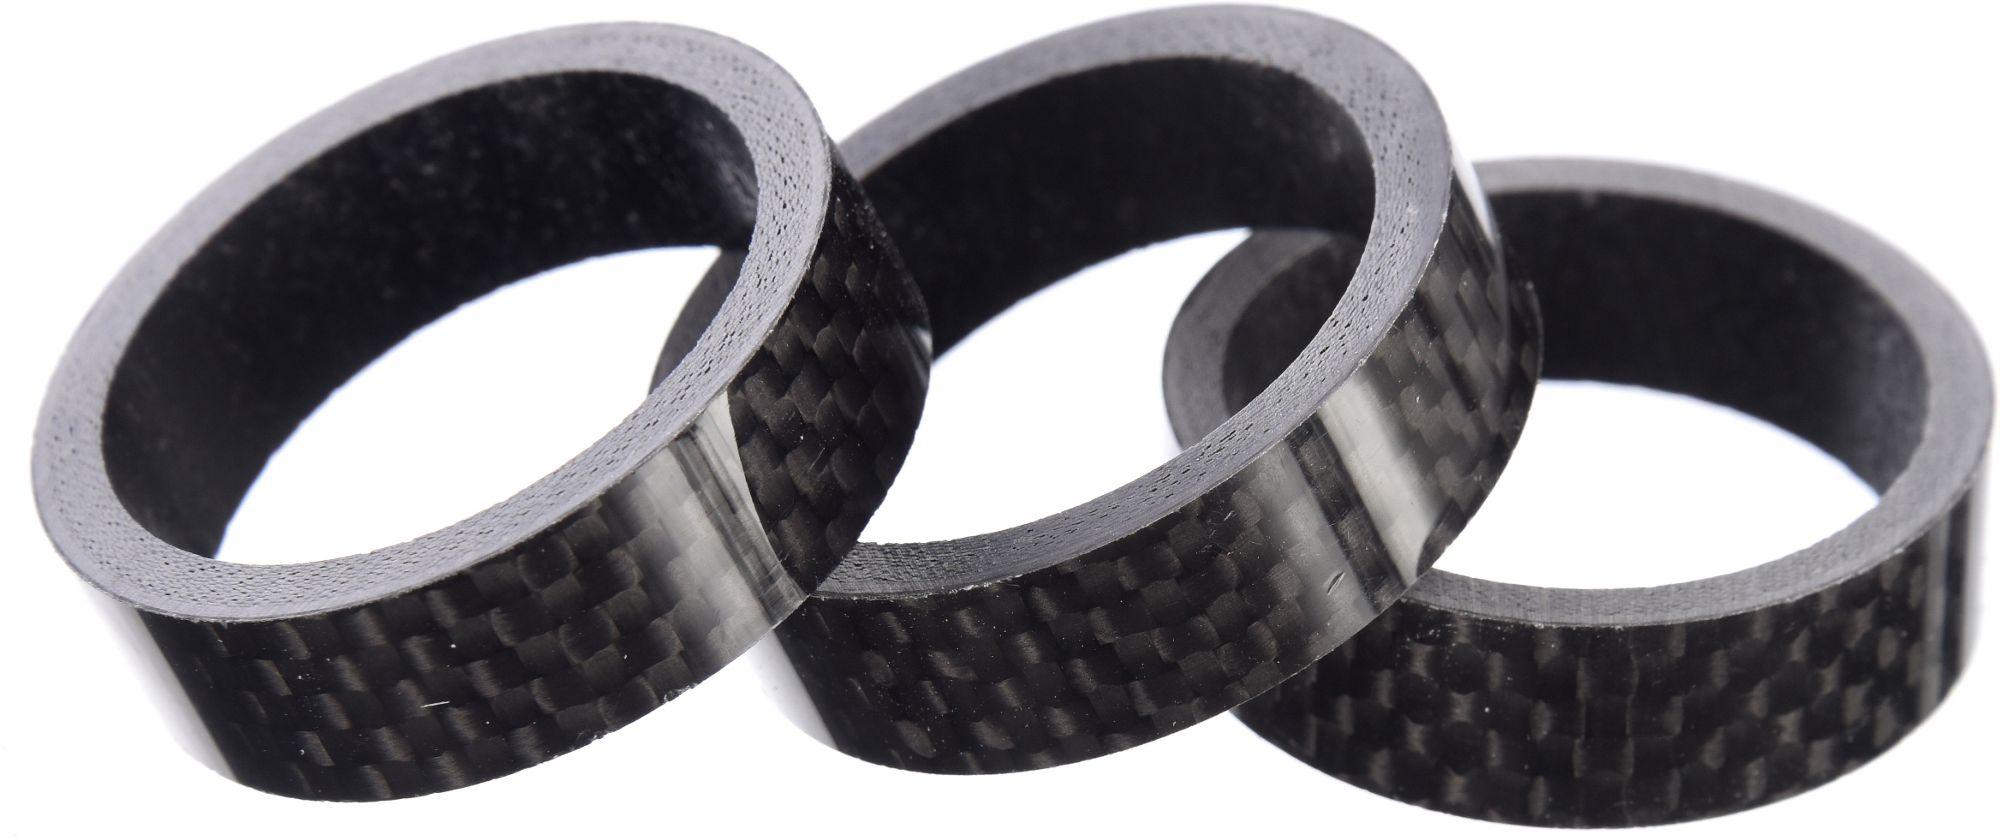 Brand-x Carbon Headset Spacers (3x10mm)  Black